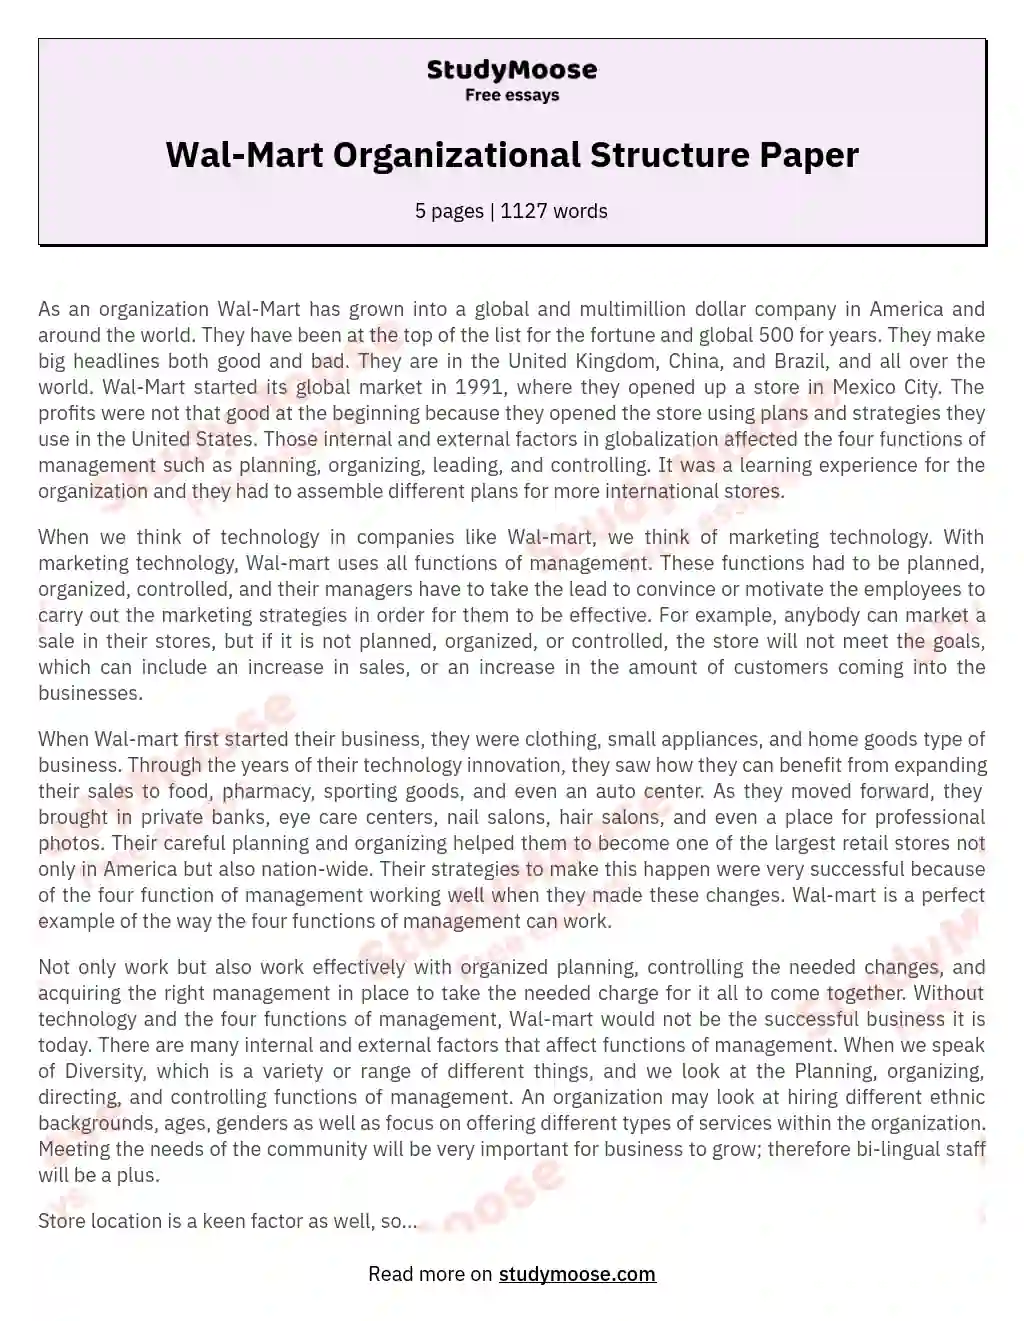 Wal-Mart Organizational Structure Paper essay